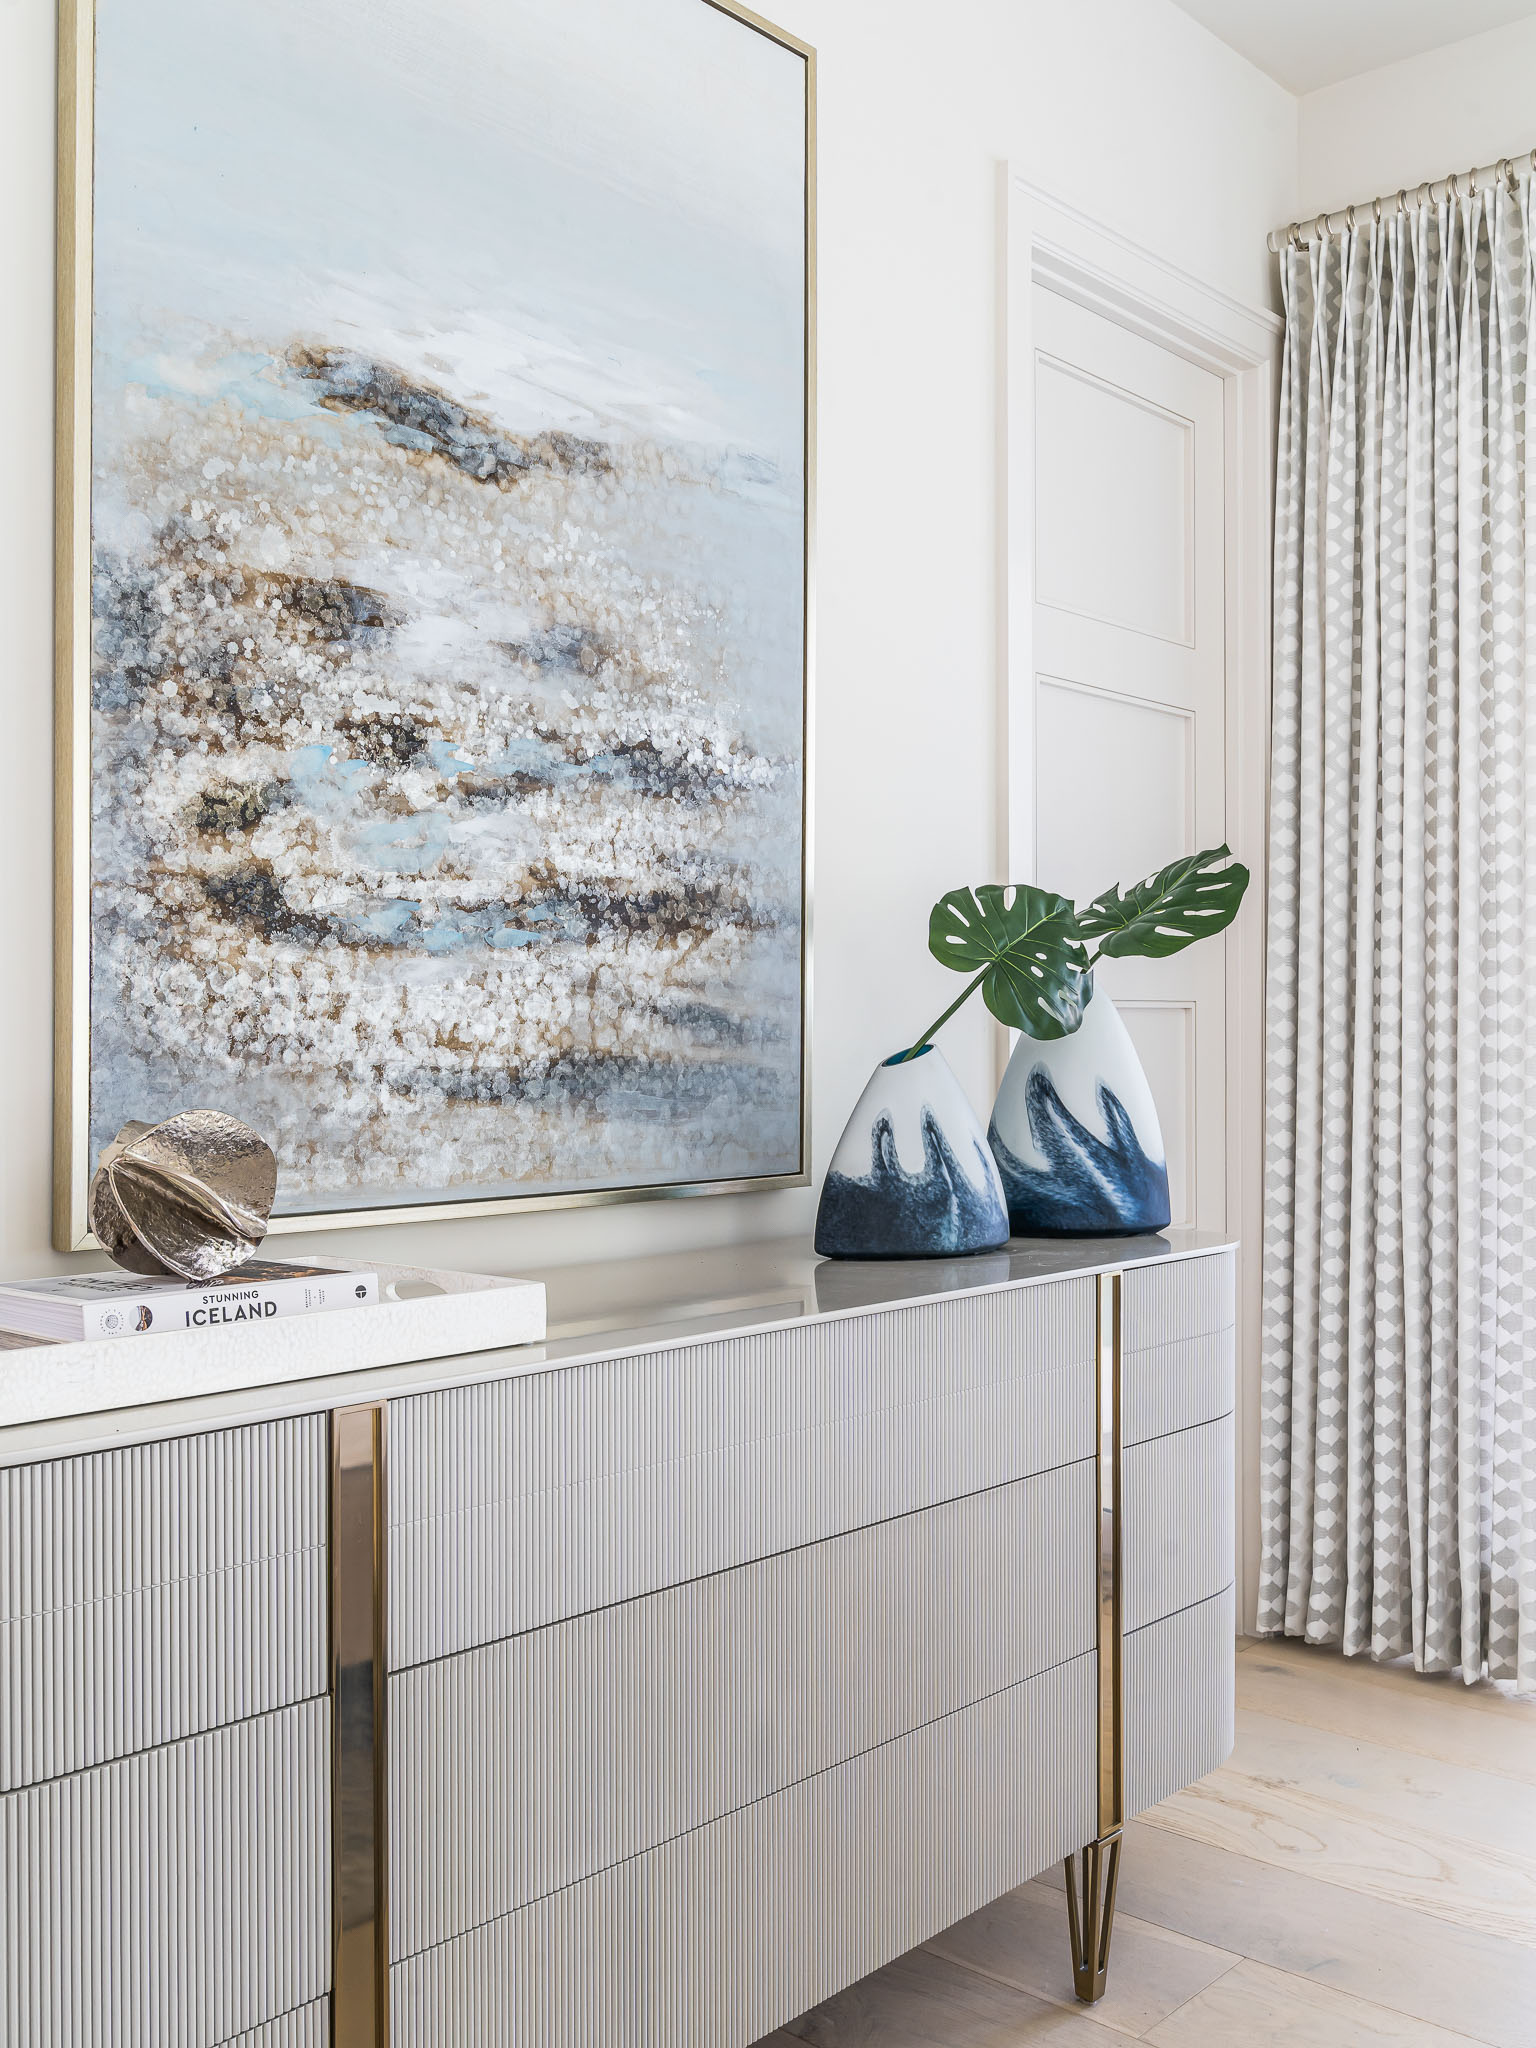 A coastal contemporary guest room with dresser, coastal wall art and accessories with a neutral palette, designed by Florida interior designer Brooke Meyer of Gulfshore Interior Design